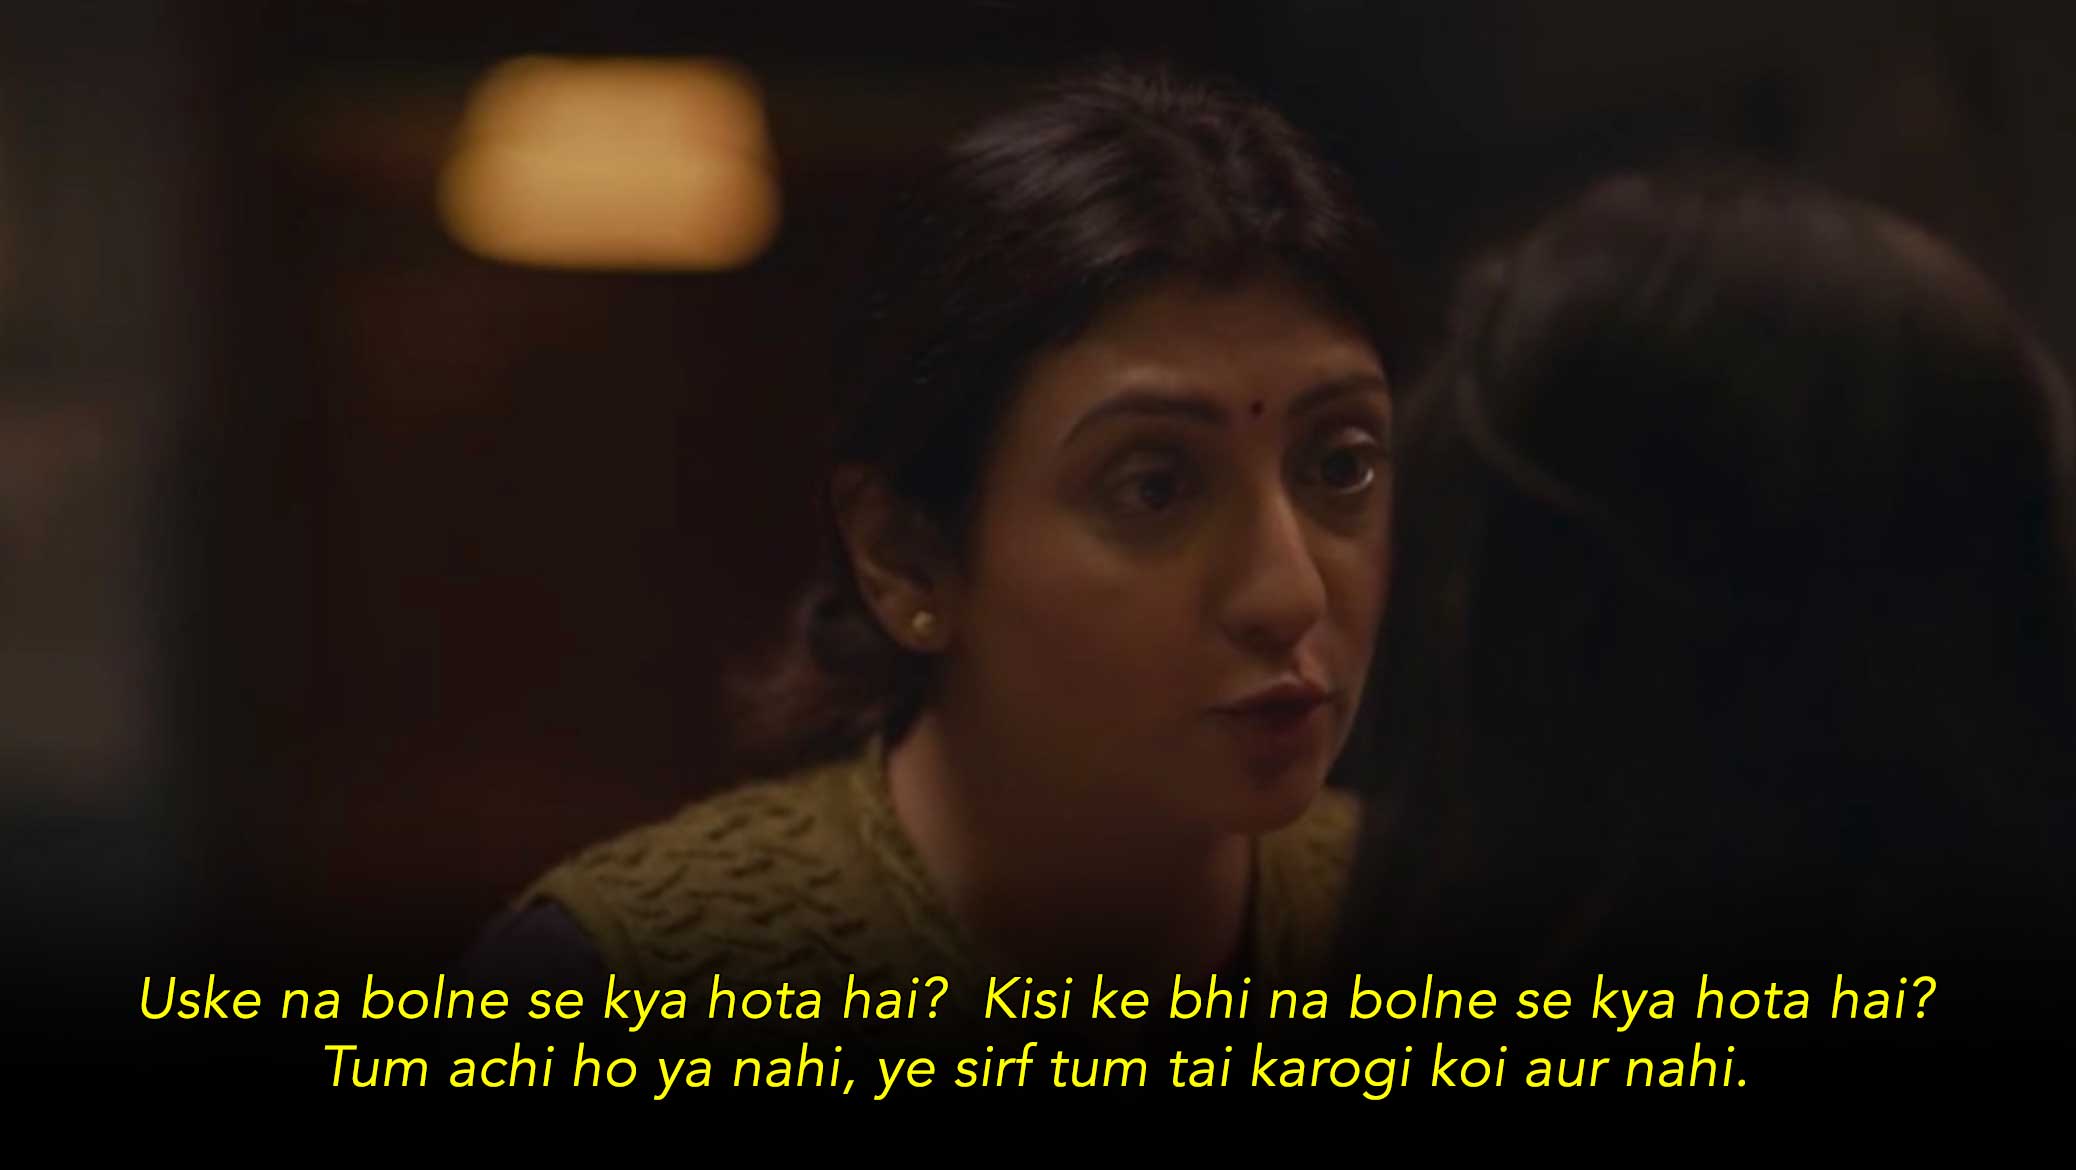 Yeh meri Family S2 life's first heartbreak  moother daughter conversation